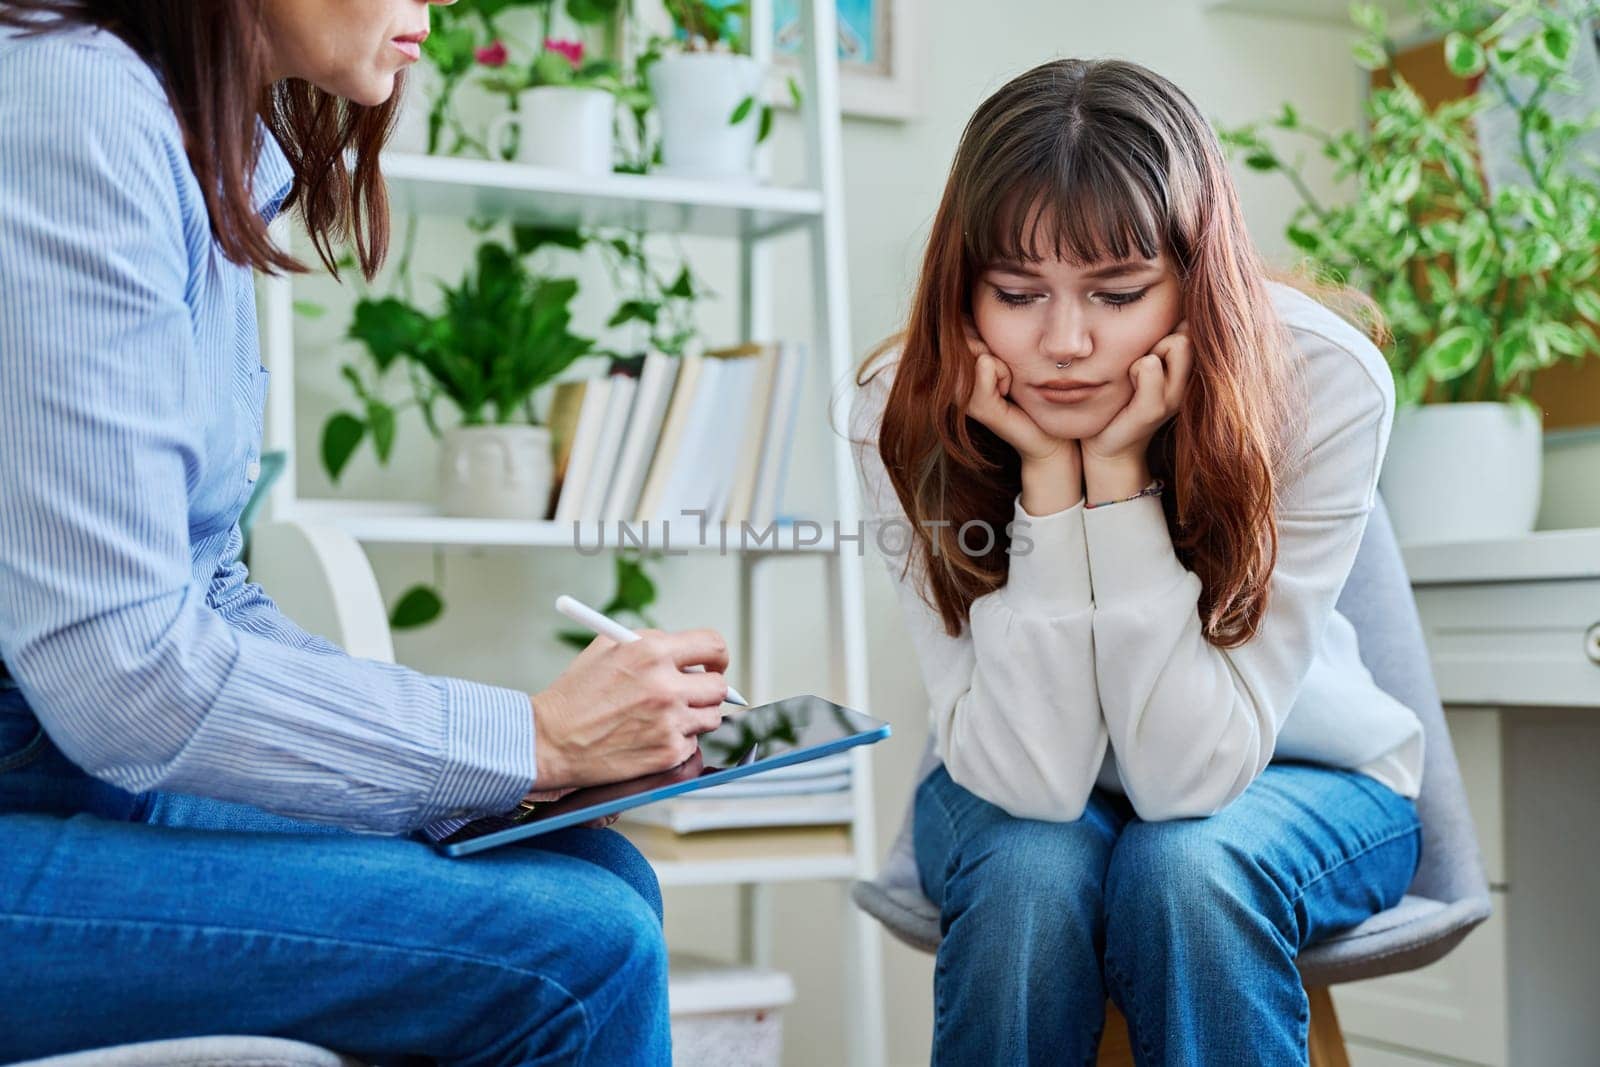 Sad, serious teenage girl at session in office of mental professional, psychologist, counselor, social worker. Feelings, difficulties, problems, depression, stress youth concept